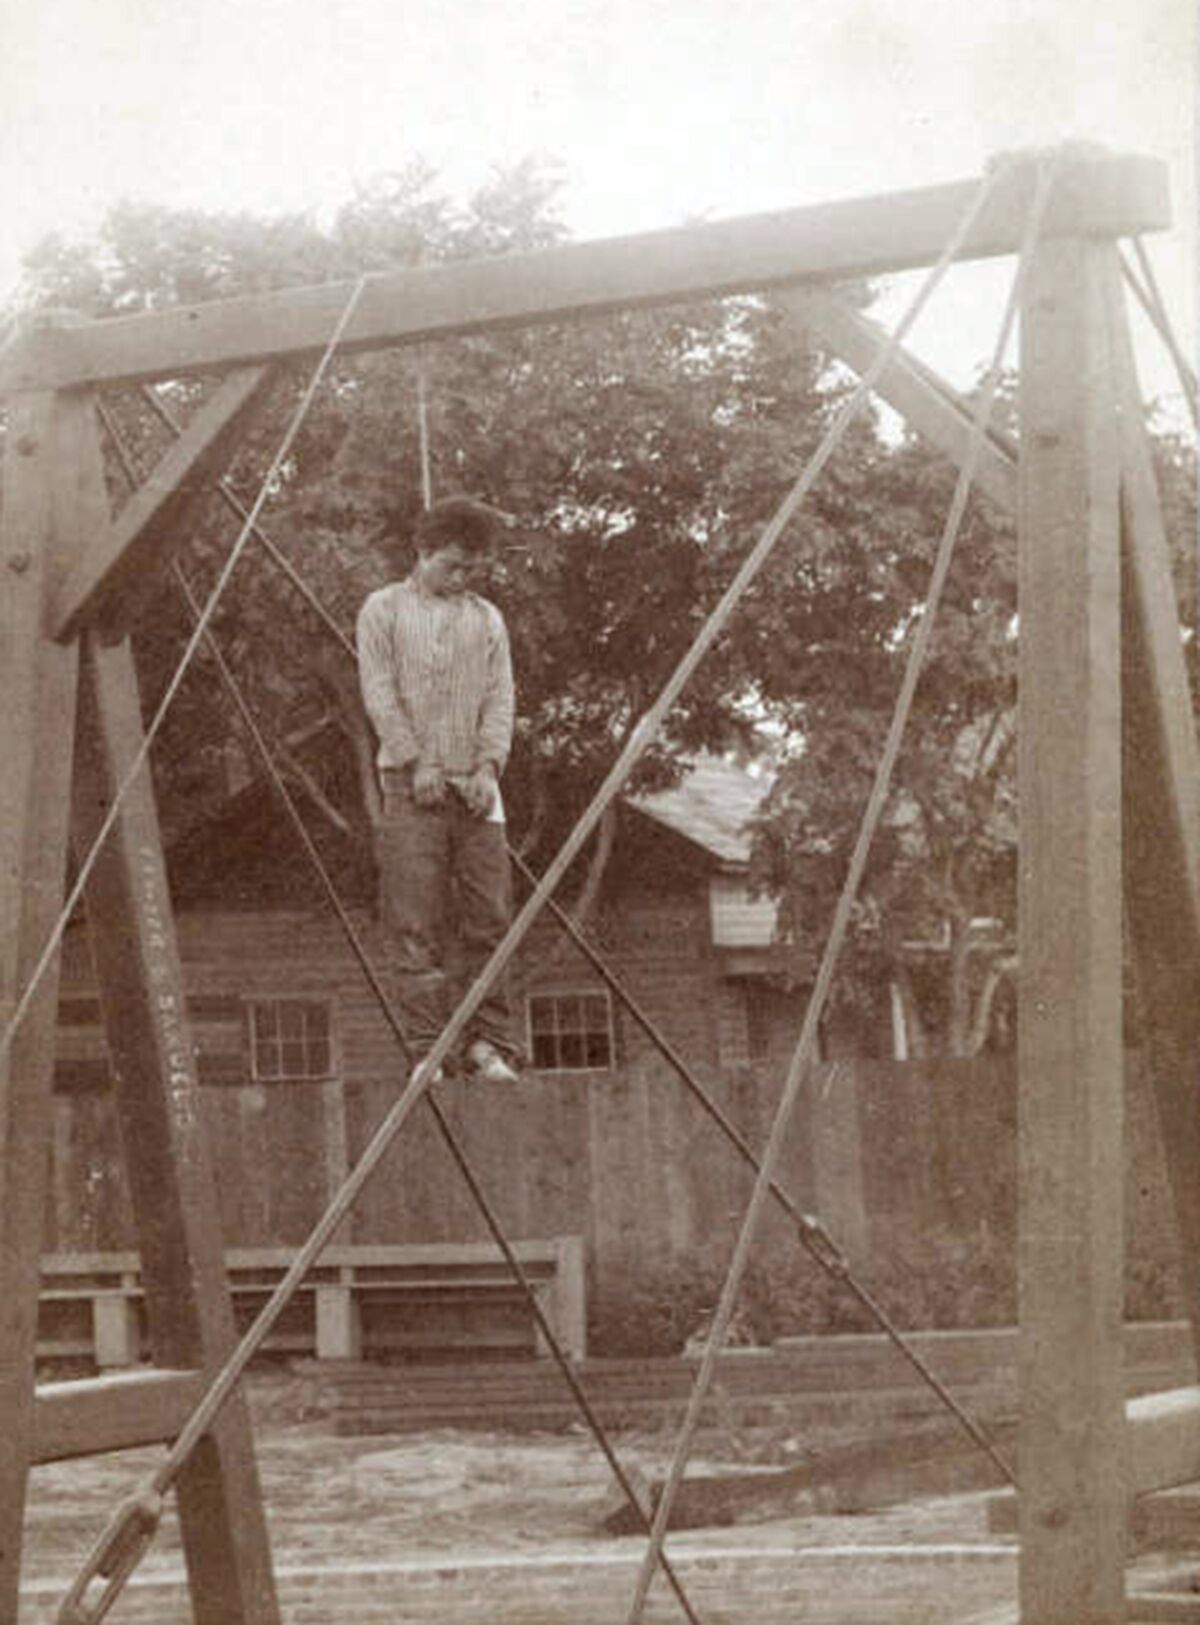 A man is hanged from from a scaffolding 